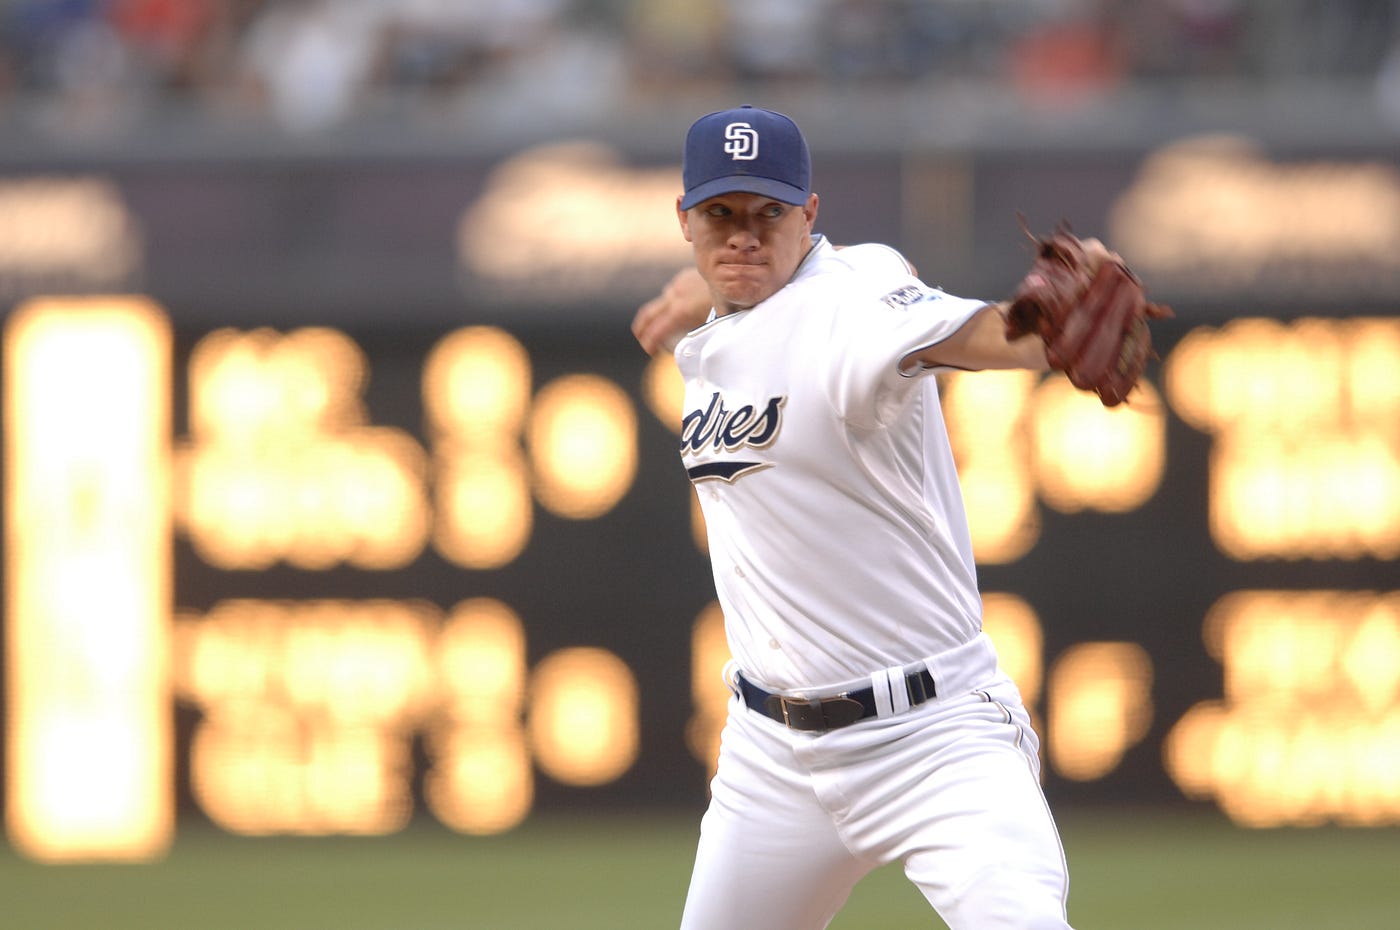 Still with Padres, Peavy gets Opening Day start